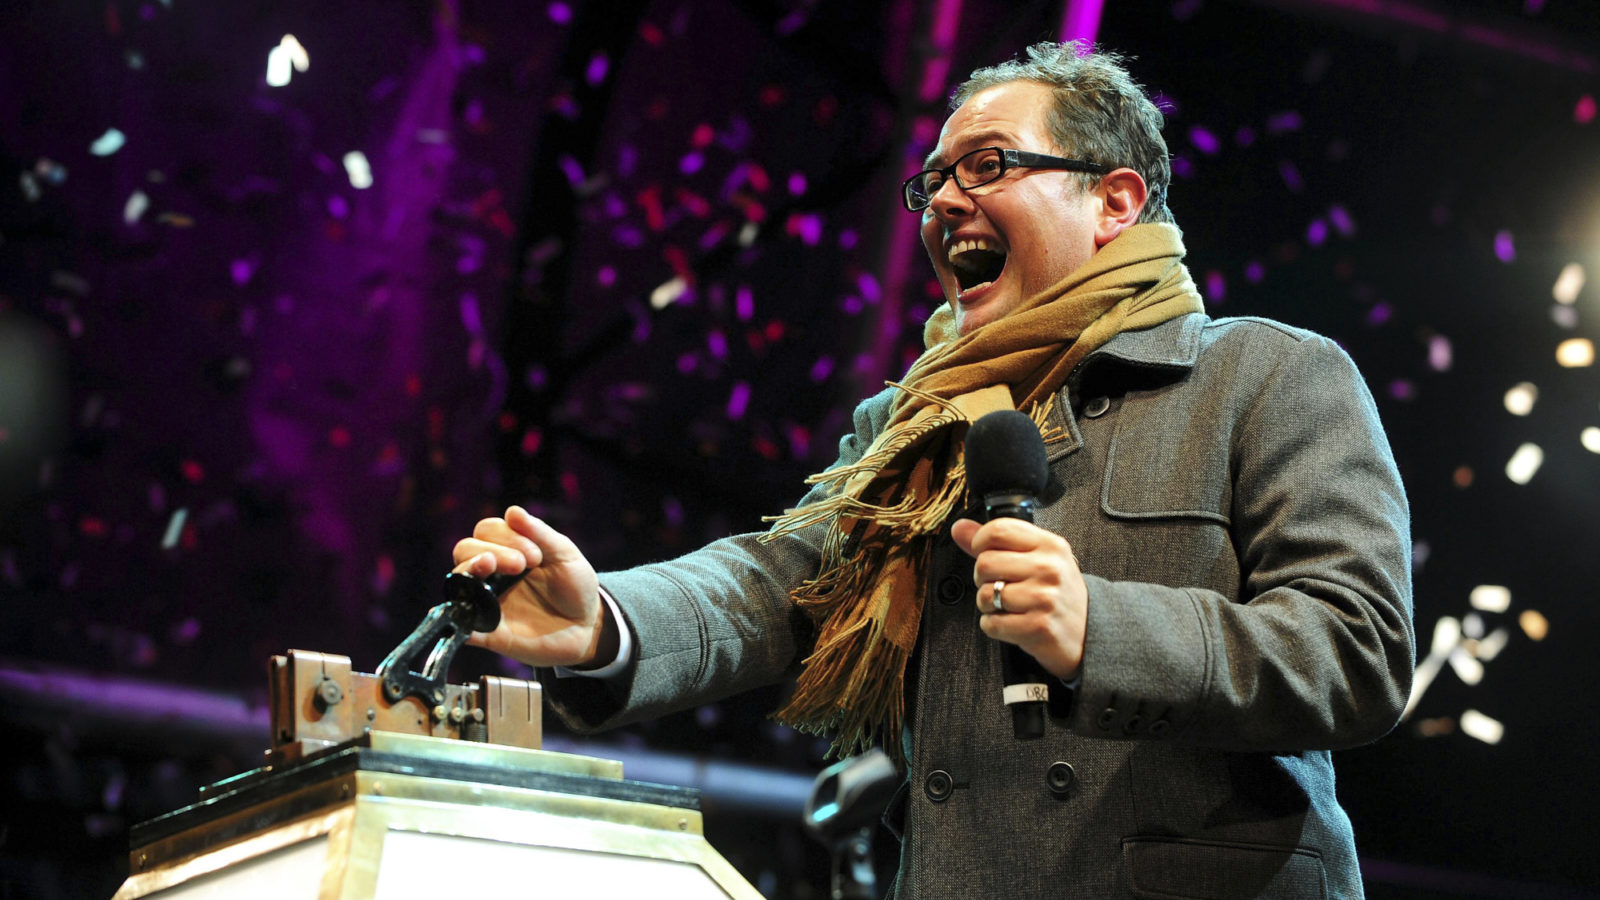 Alan Carr in coat and scarf pulling the illuminations switch on switch